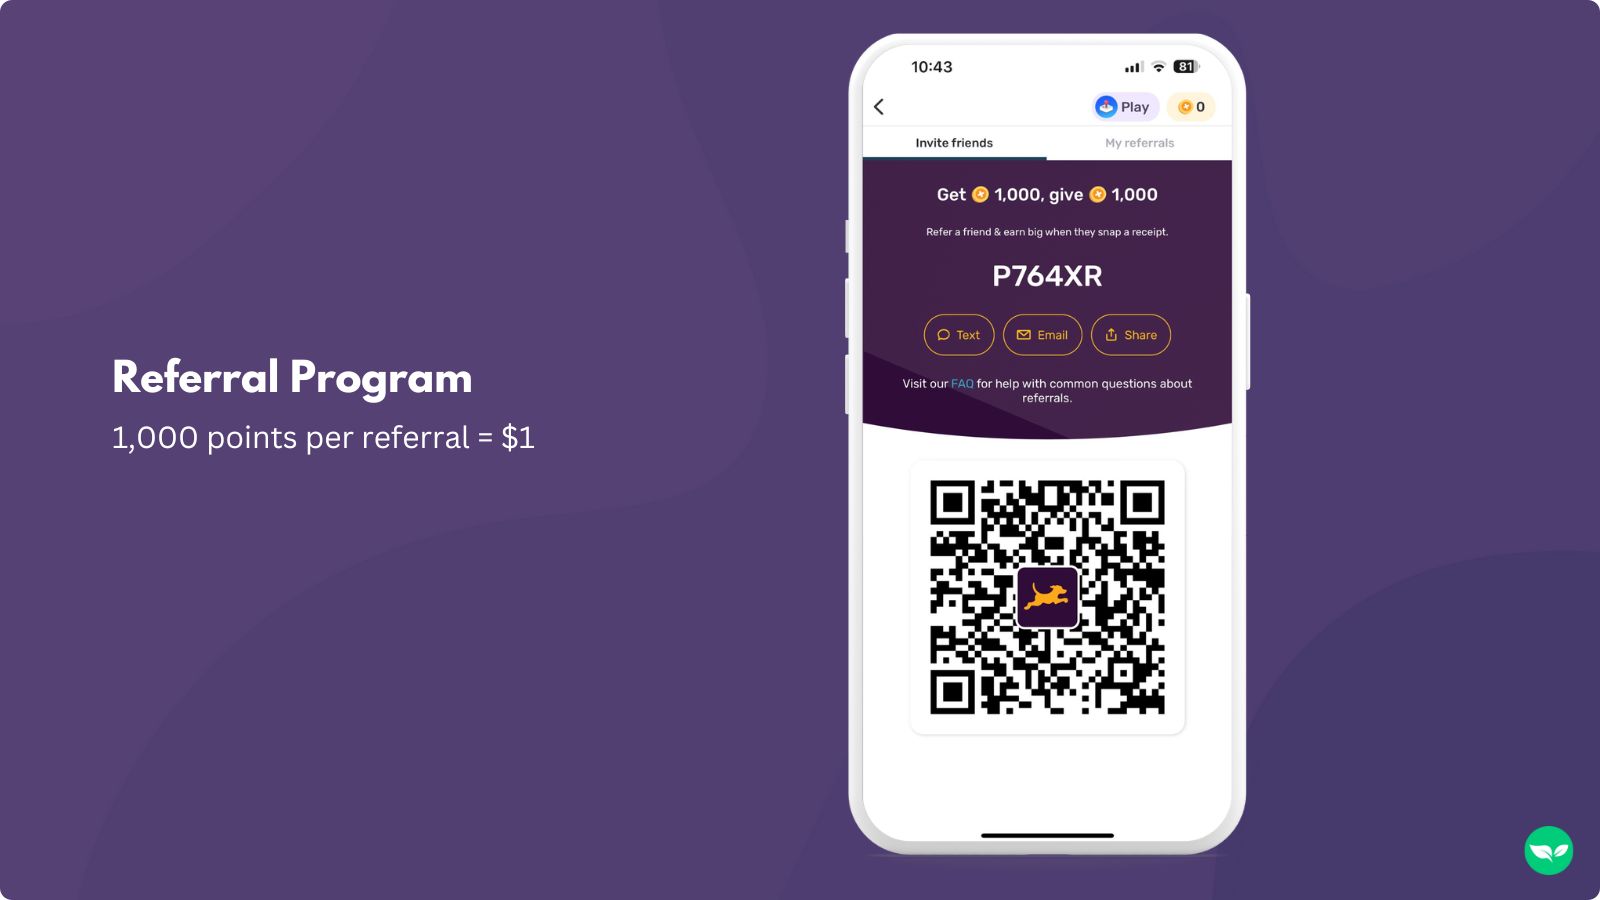 invite friends using your QR code to earn extra points